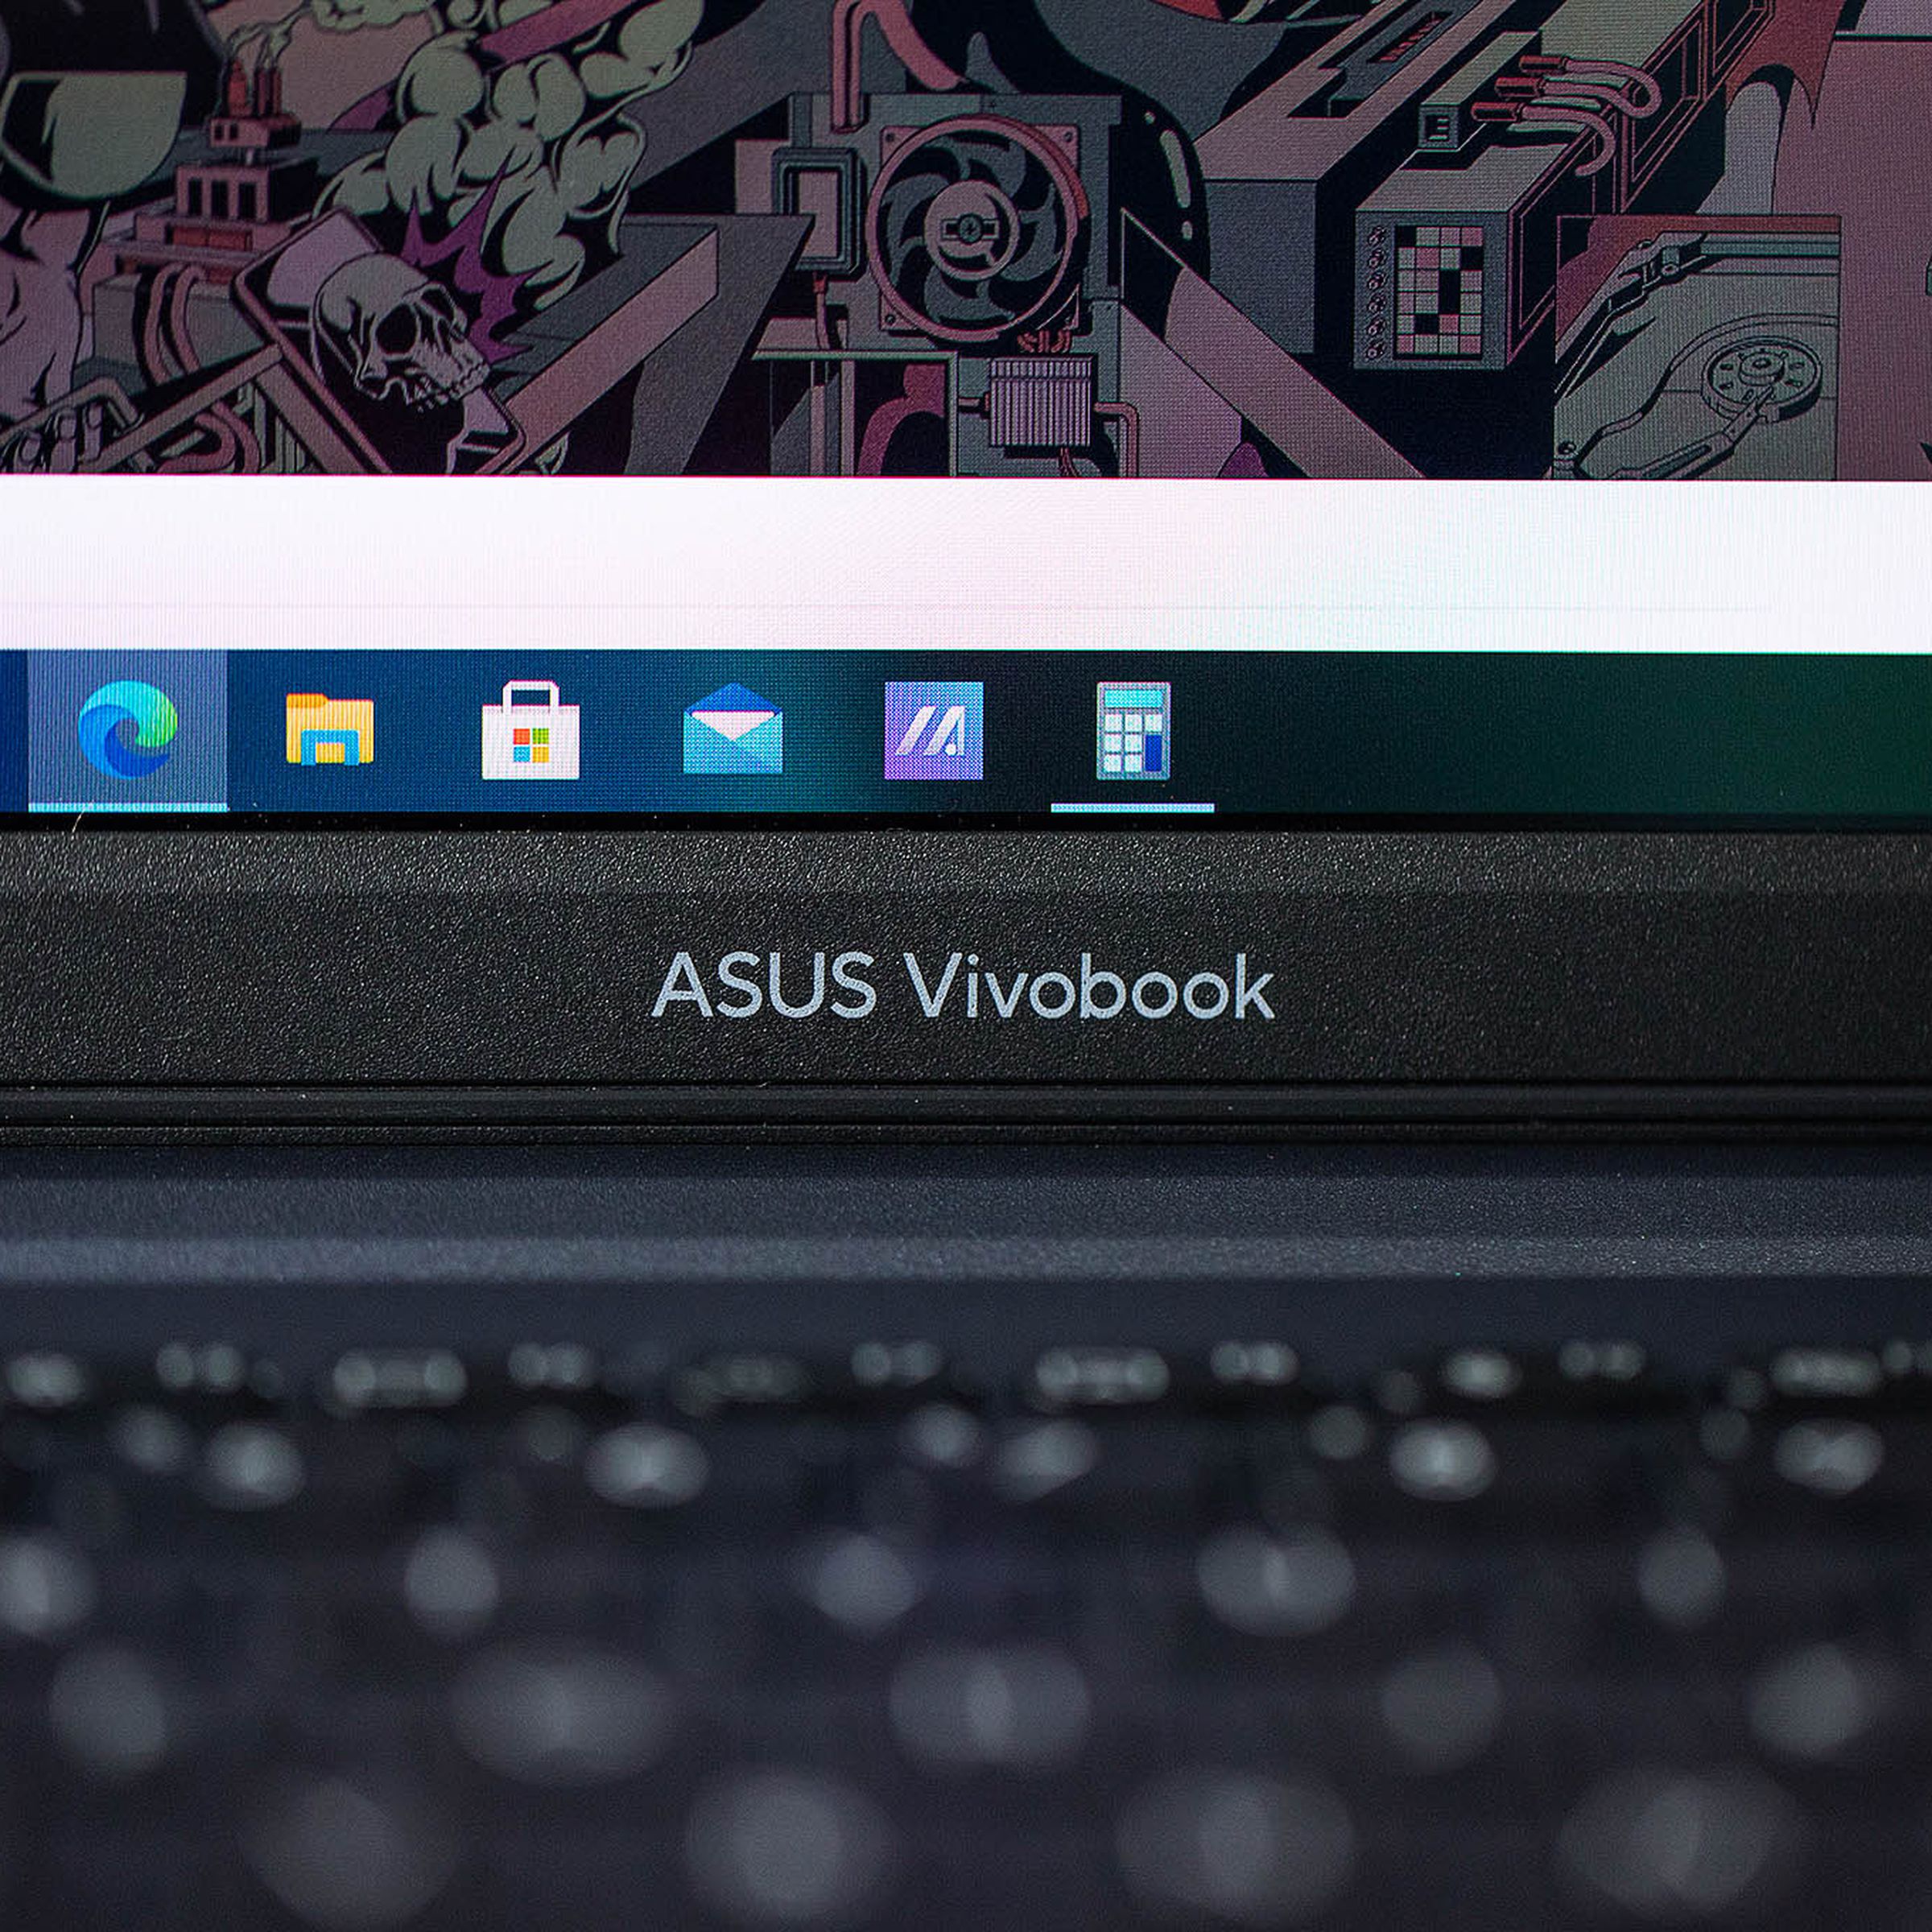 The Asus Vivobook logo on the bottom bezel of the Asus Vivobook Pro 14, up close.